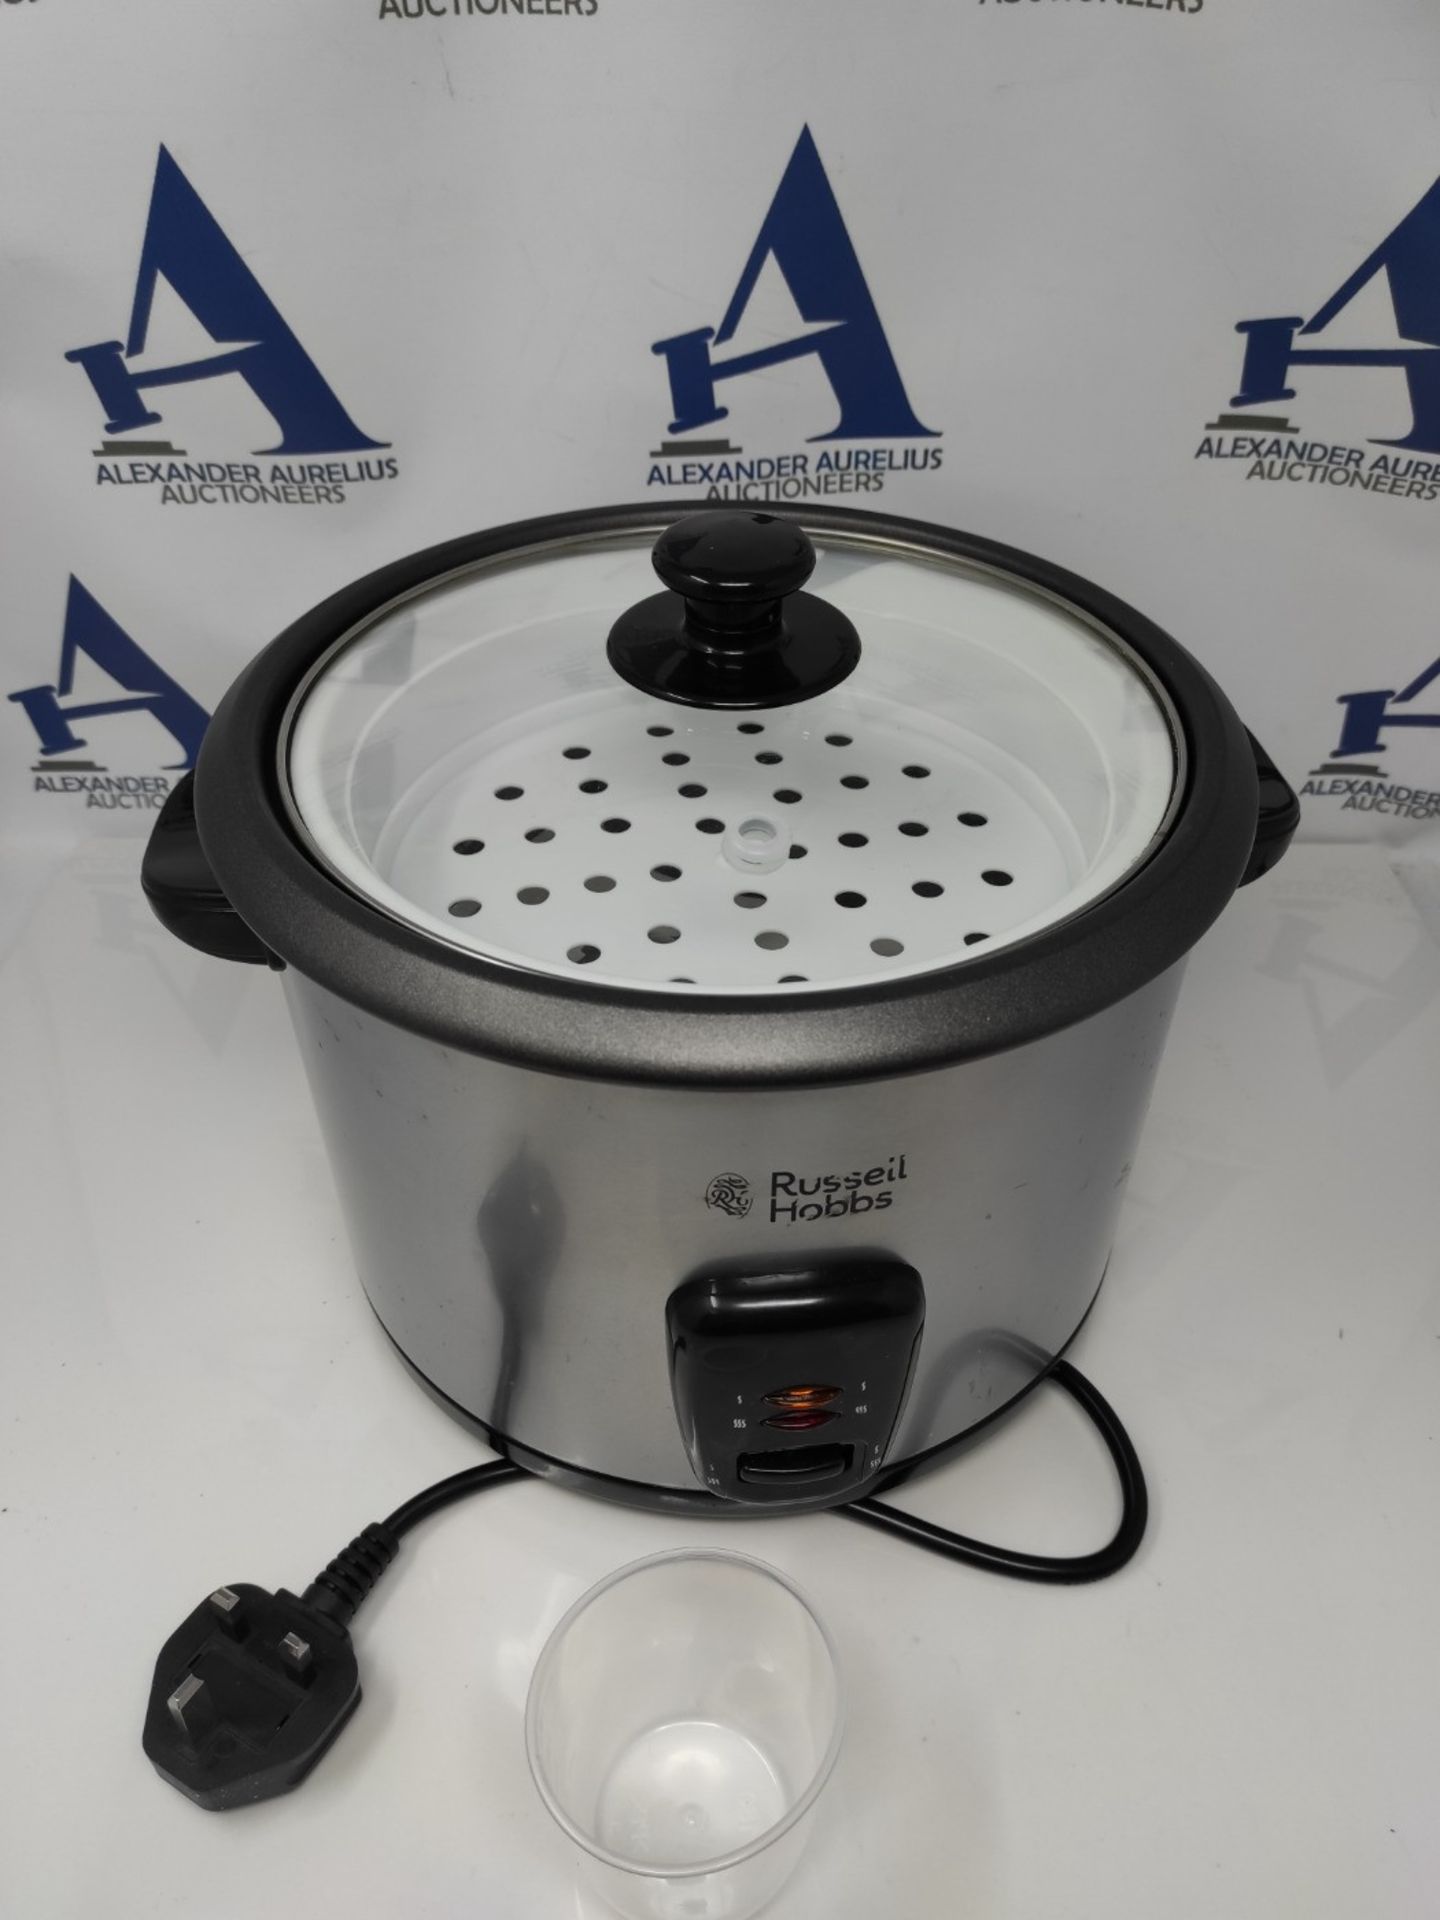 Russell Hobbs Electric Rice Cooker & Steamer - 1.8L (10 cup) Keep warm function, Remov - Image 2 of 2